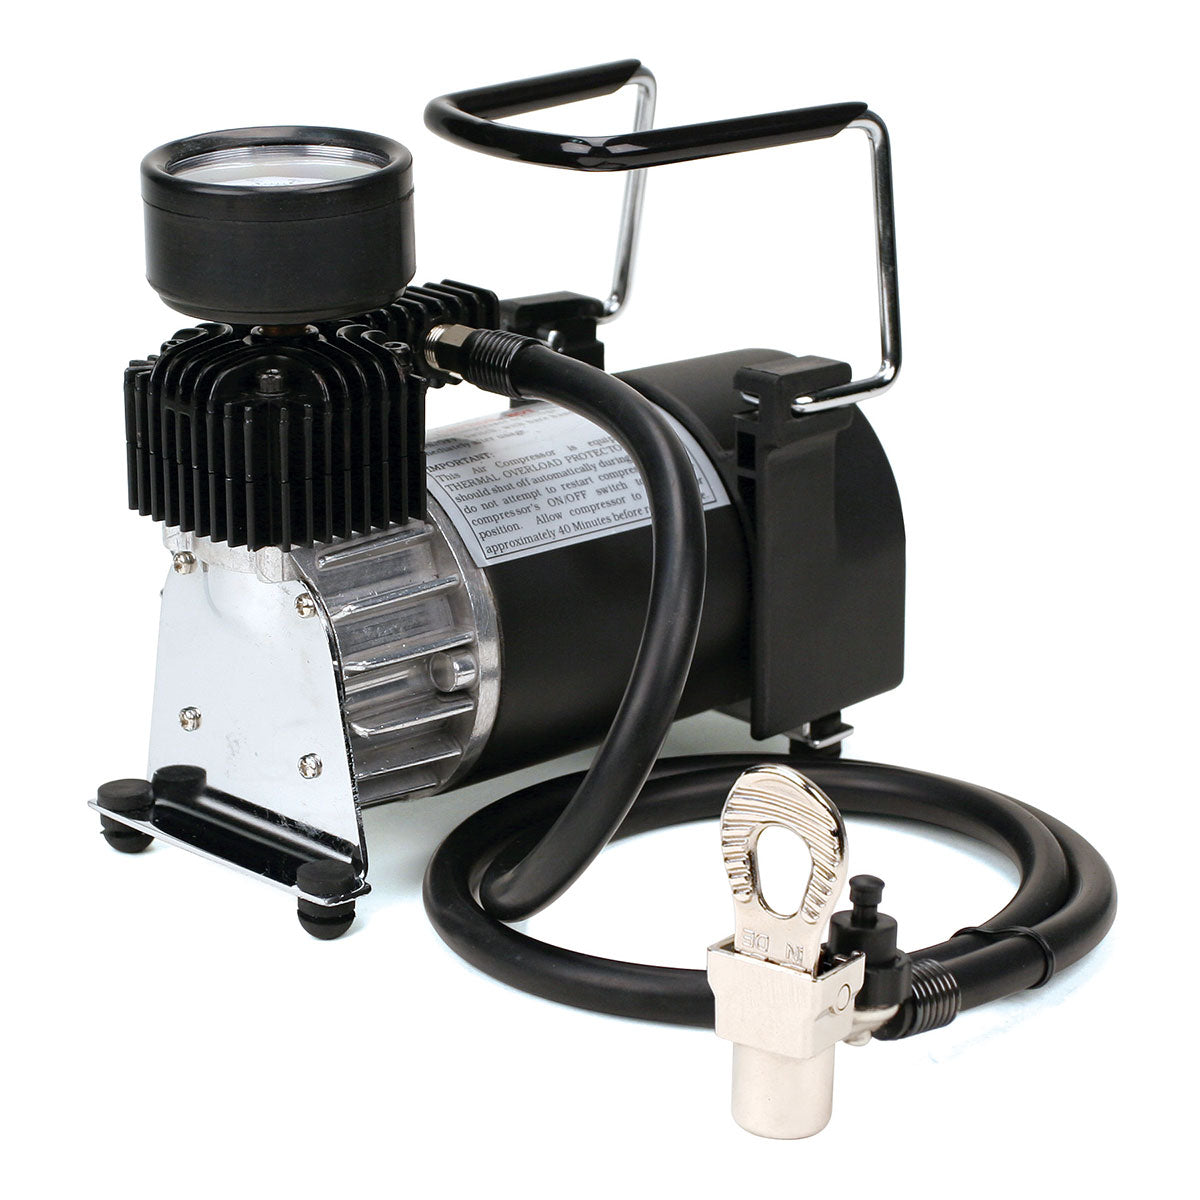 Viair 90p Compressor Kit With Press-on Chuck - Up To 31" Tires